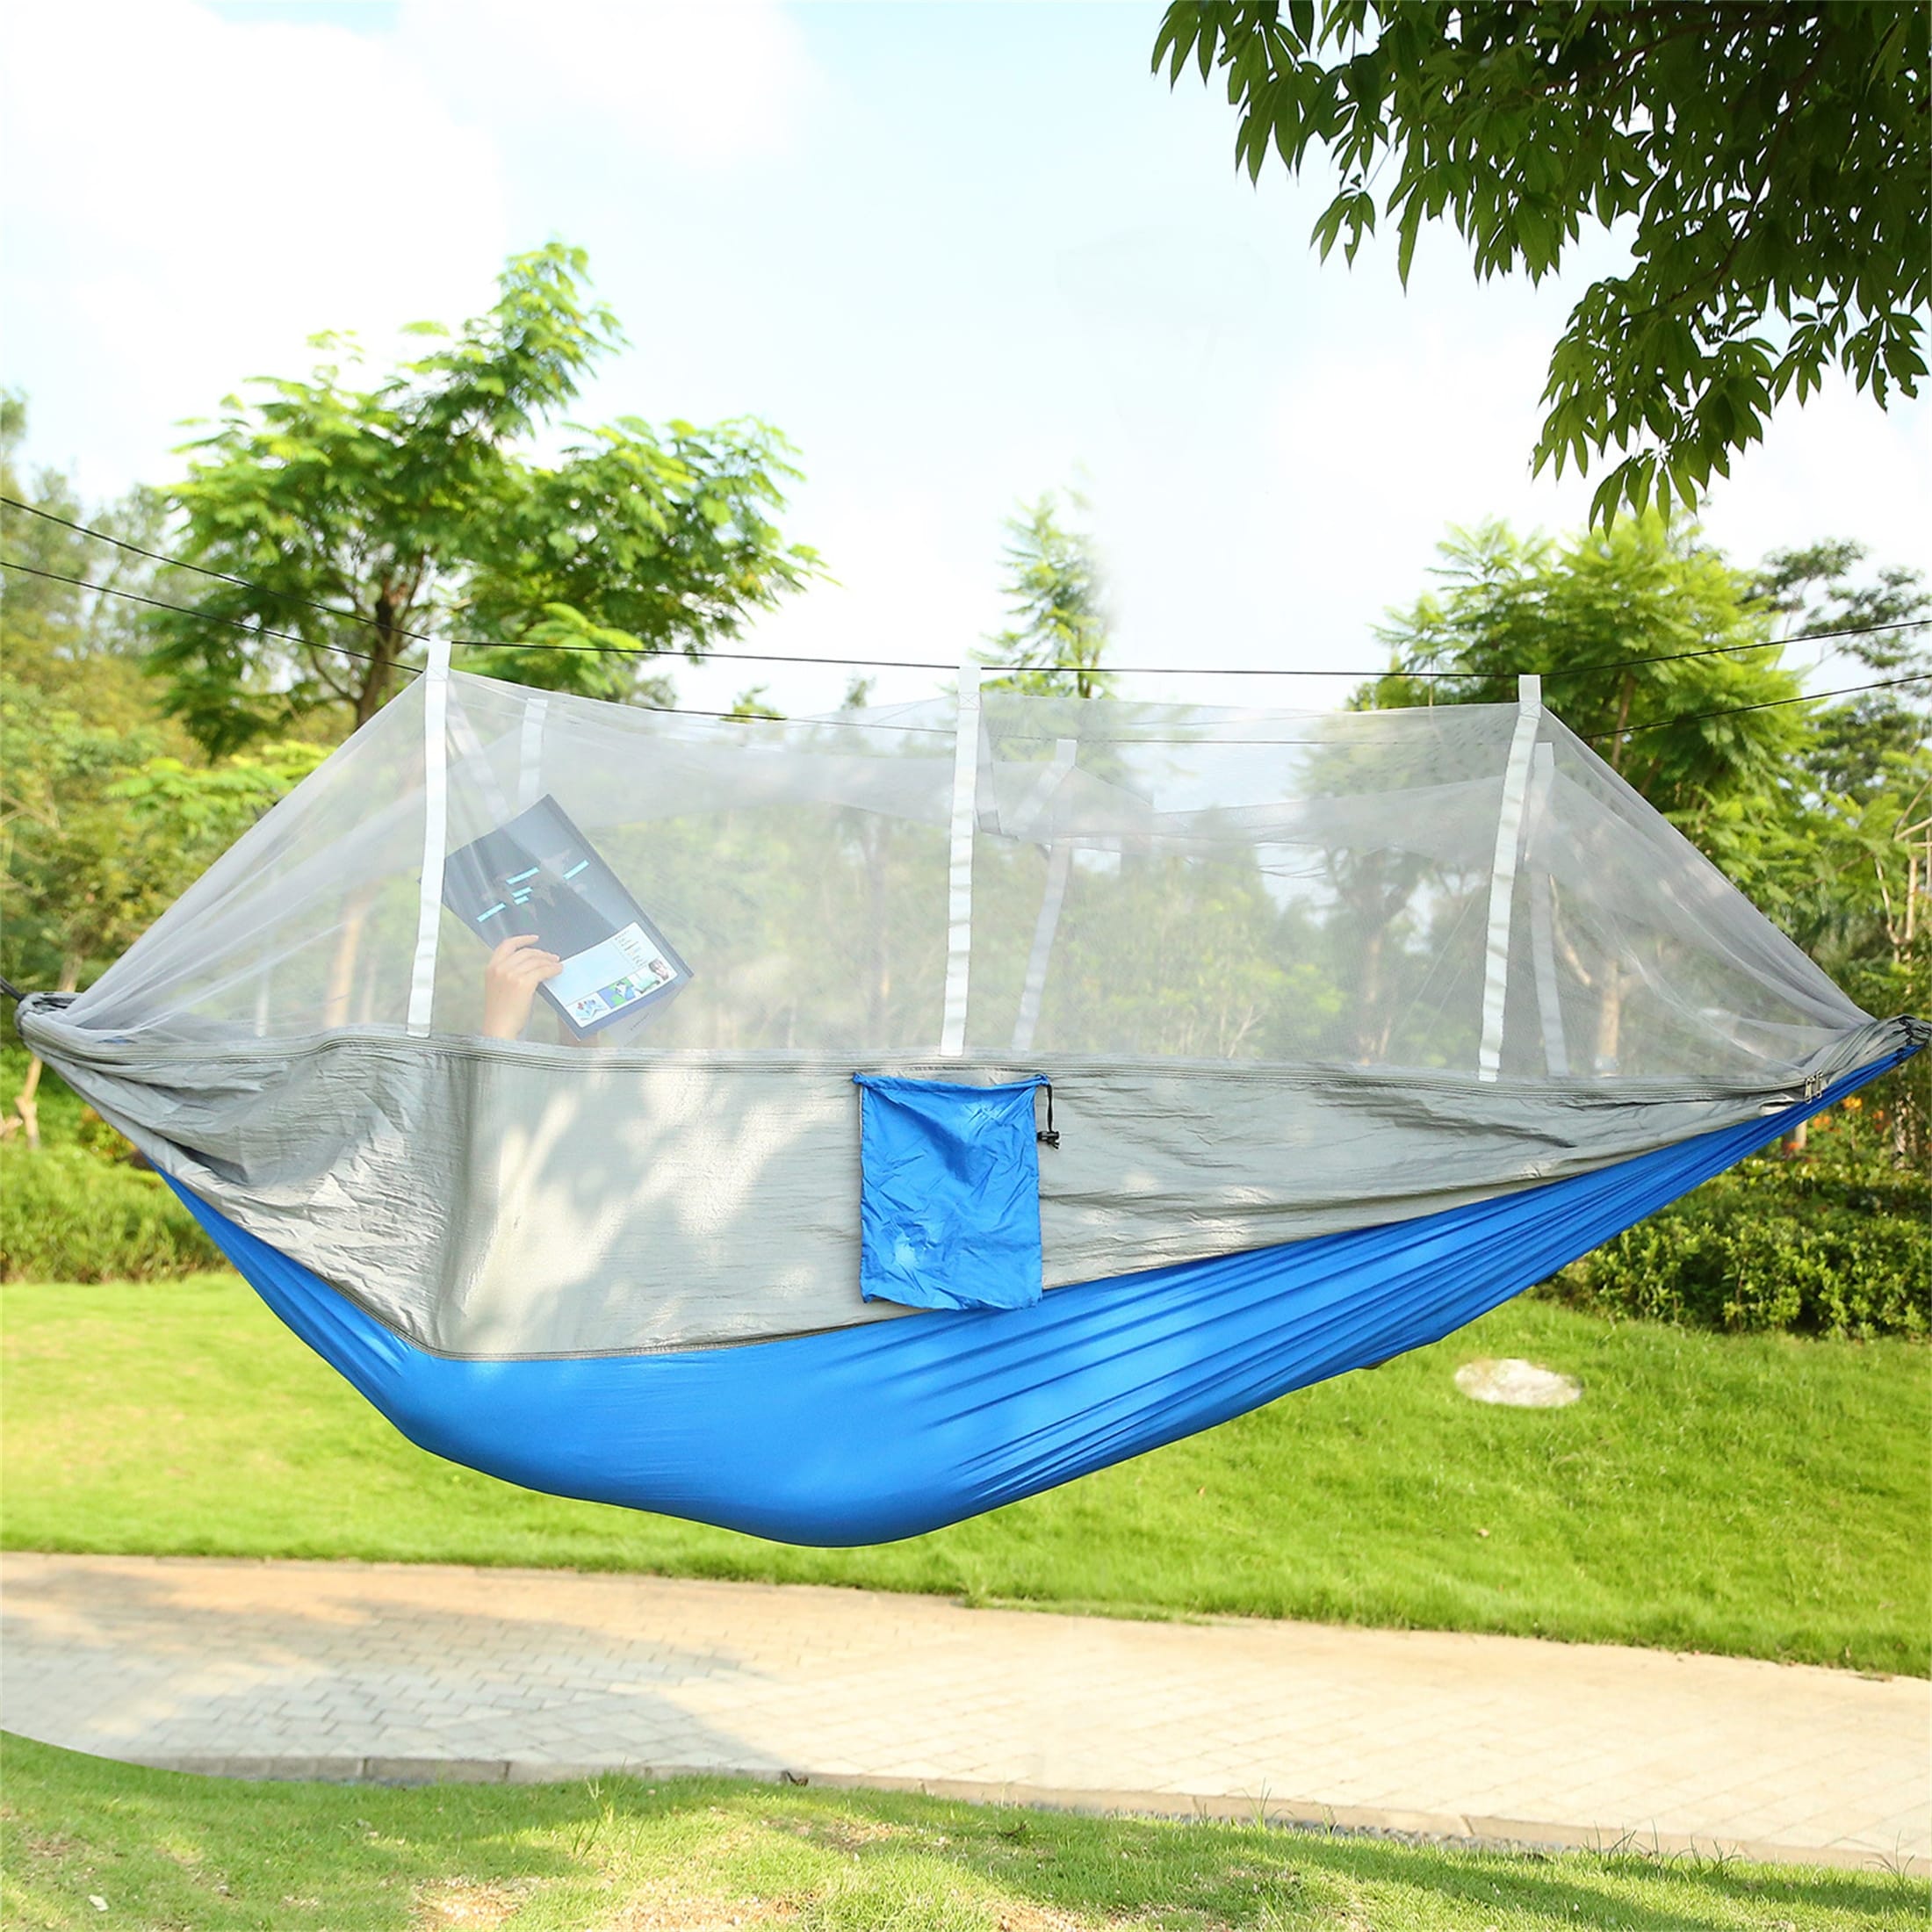 600lbs Portable Double Hammock with Mosquito Net Outdoor Camping Hanging Bed 